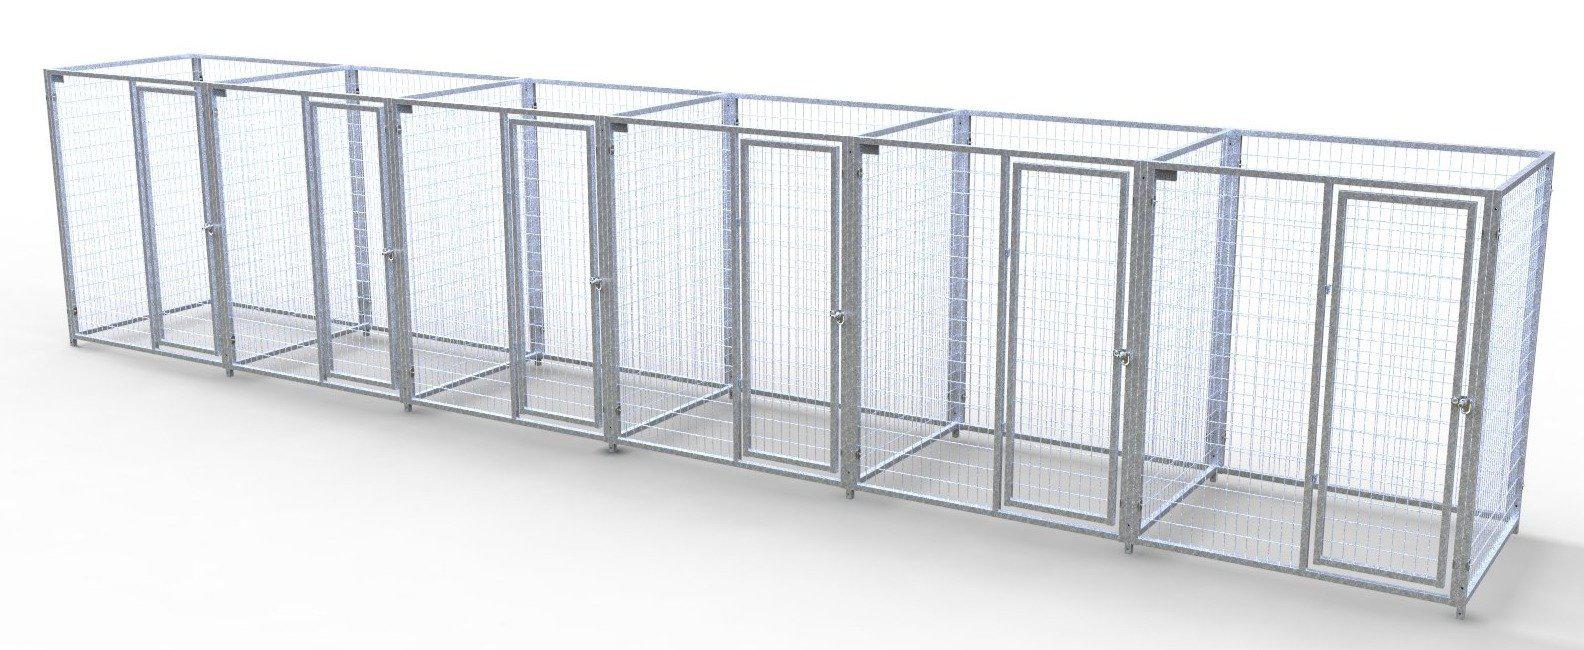 TK Products Pro-Series Enclosed Multi-Run Dog Kennels 5’x5′ w/ Stainless steel hardware.